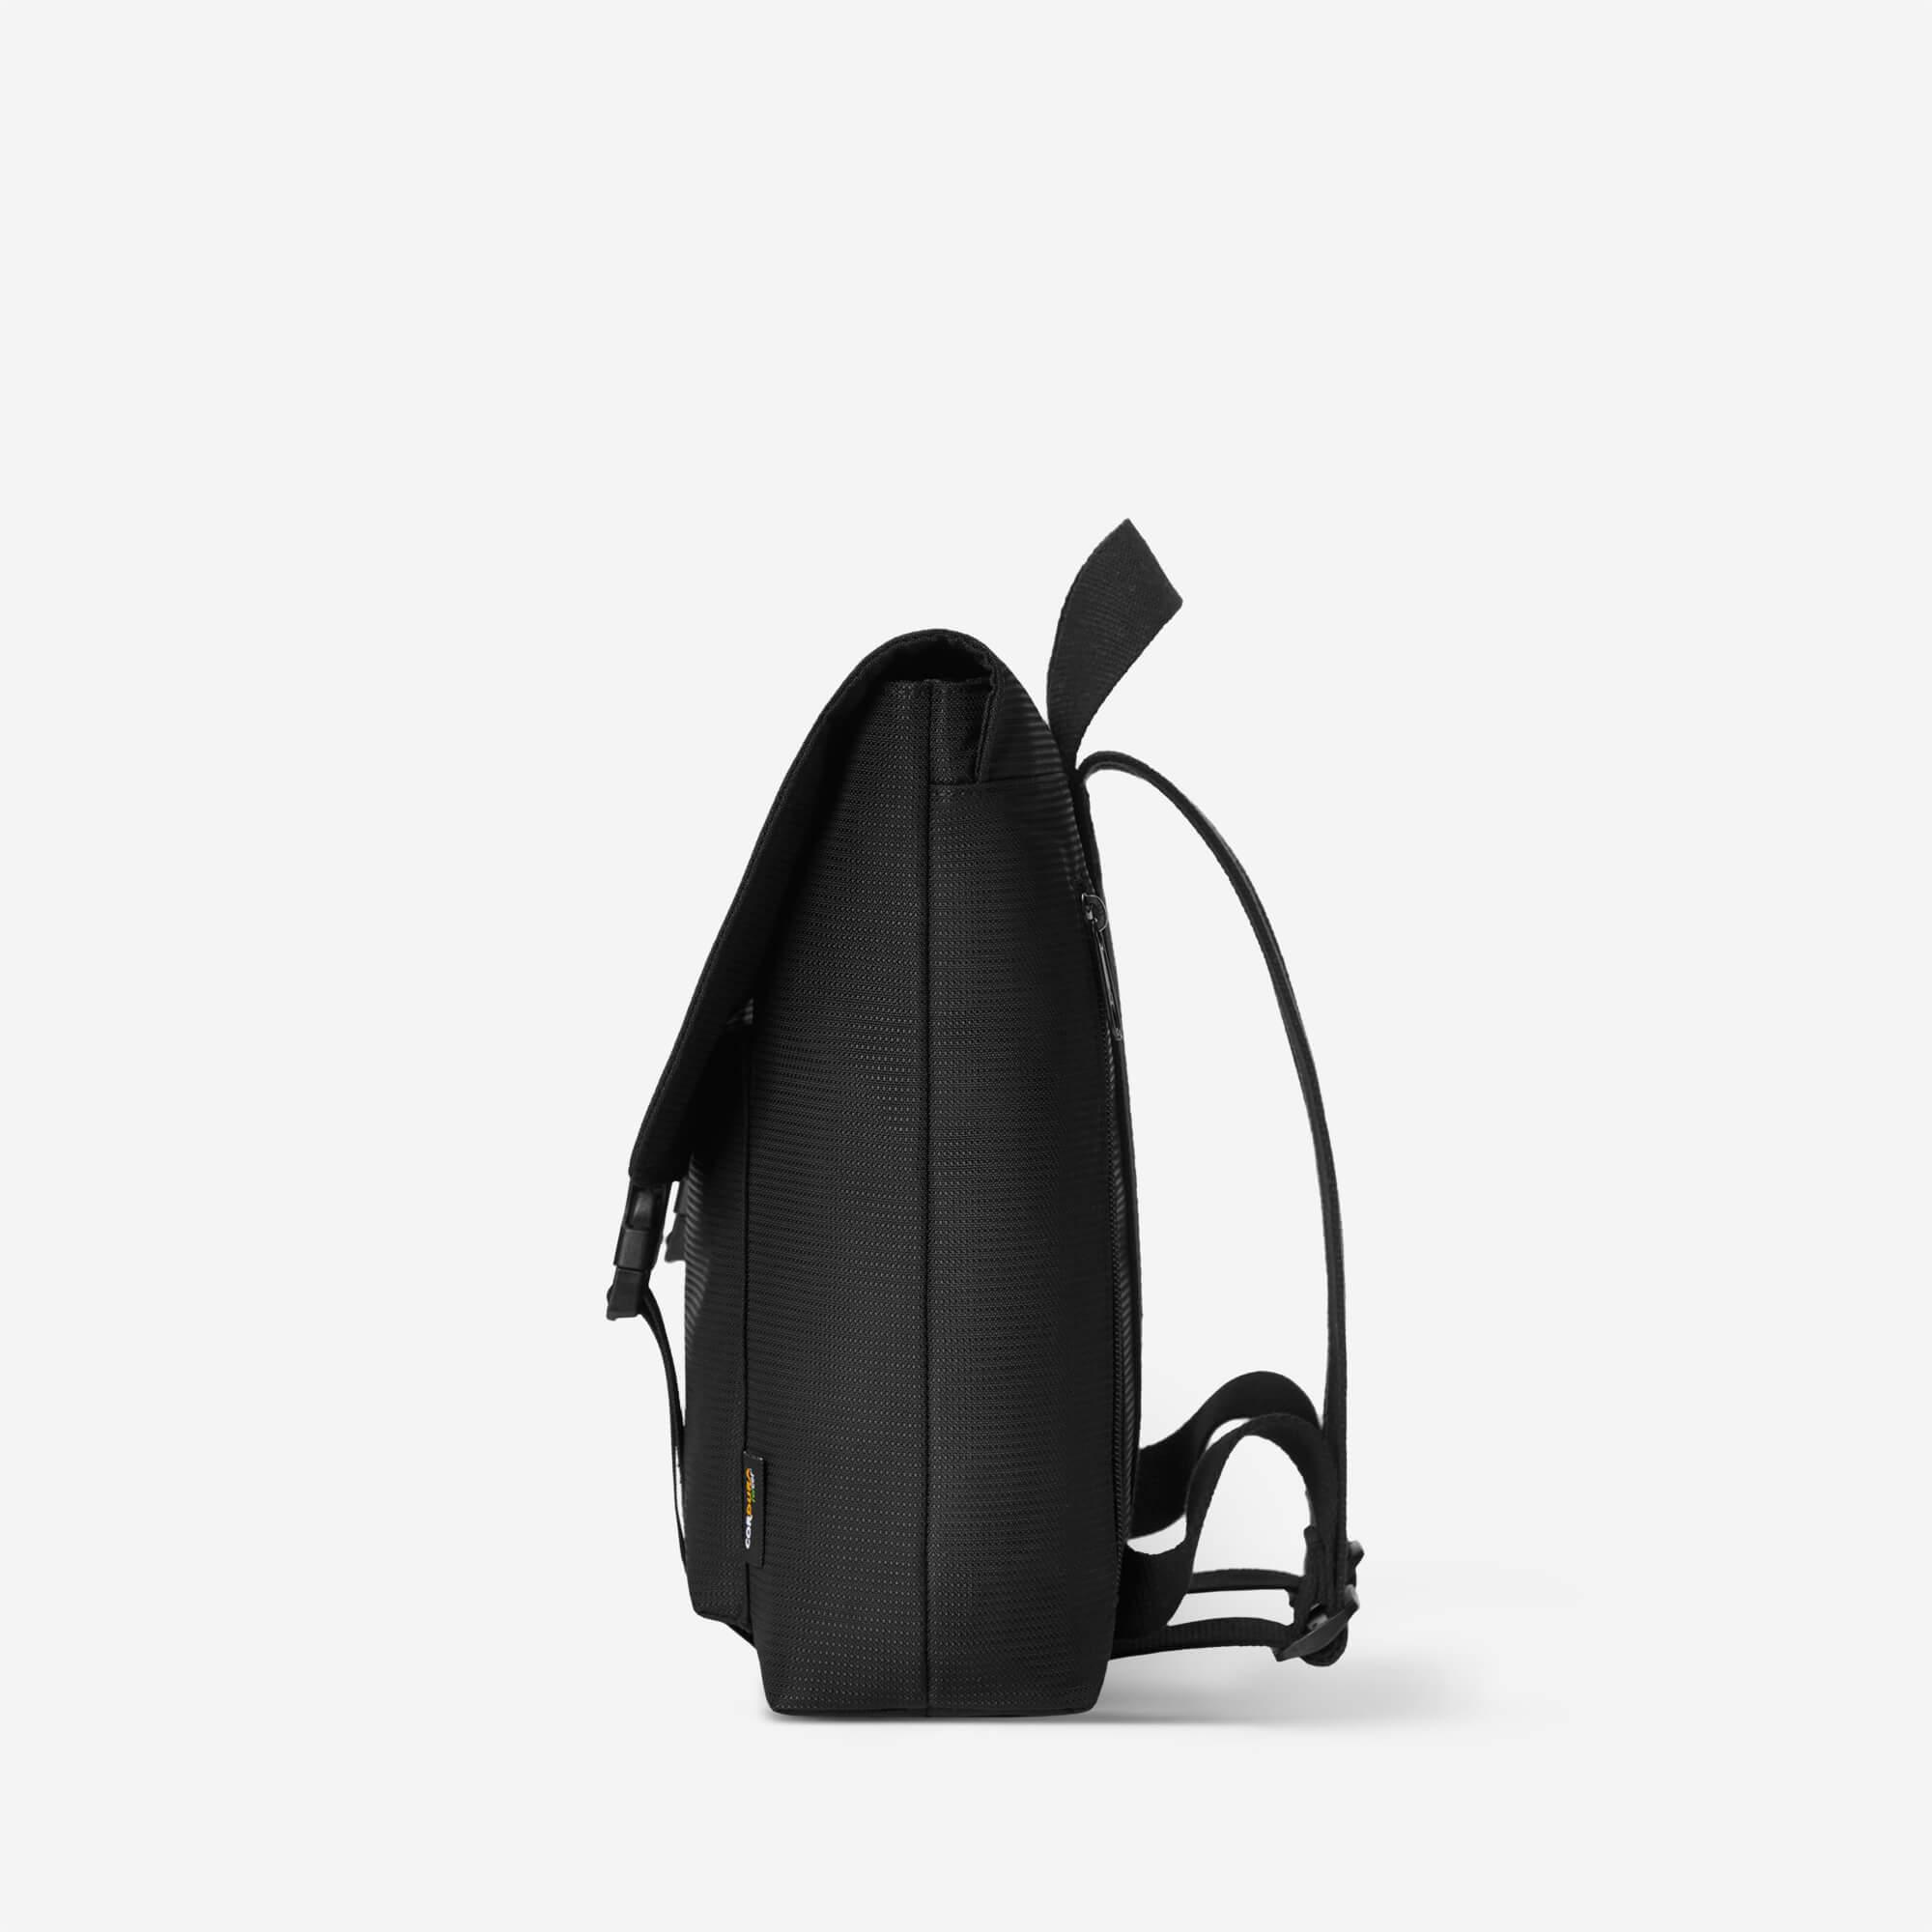 Minimalist School Backpack For Boys and Girls